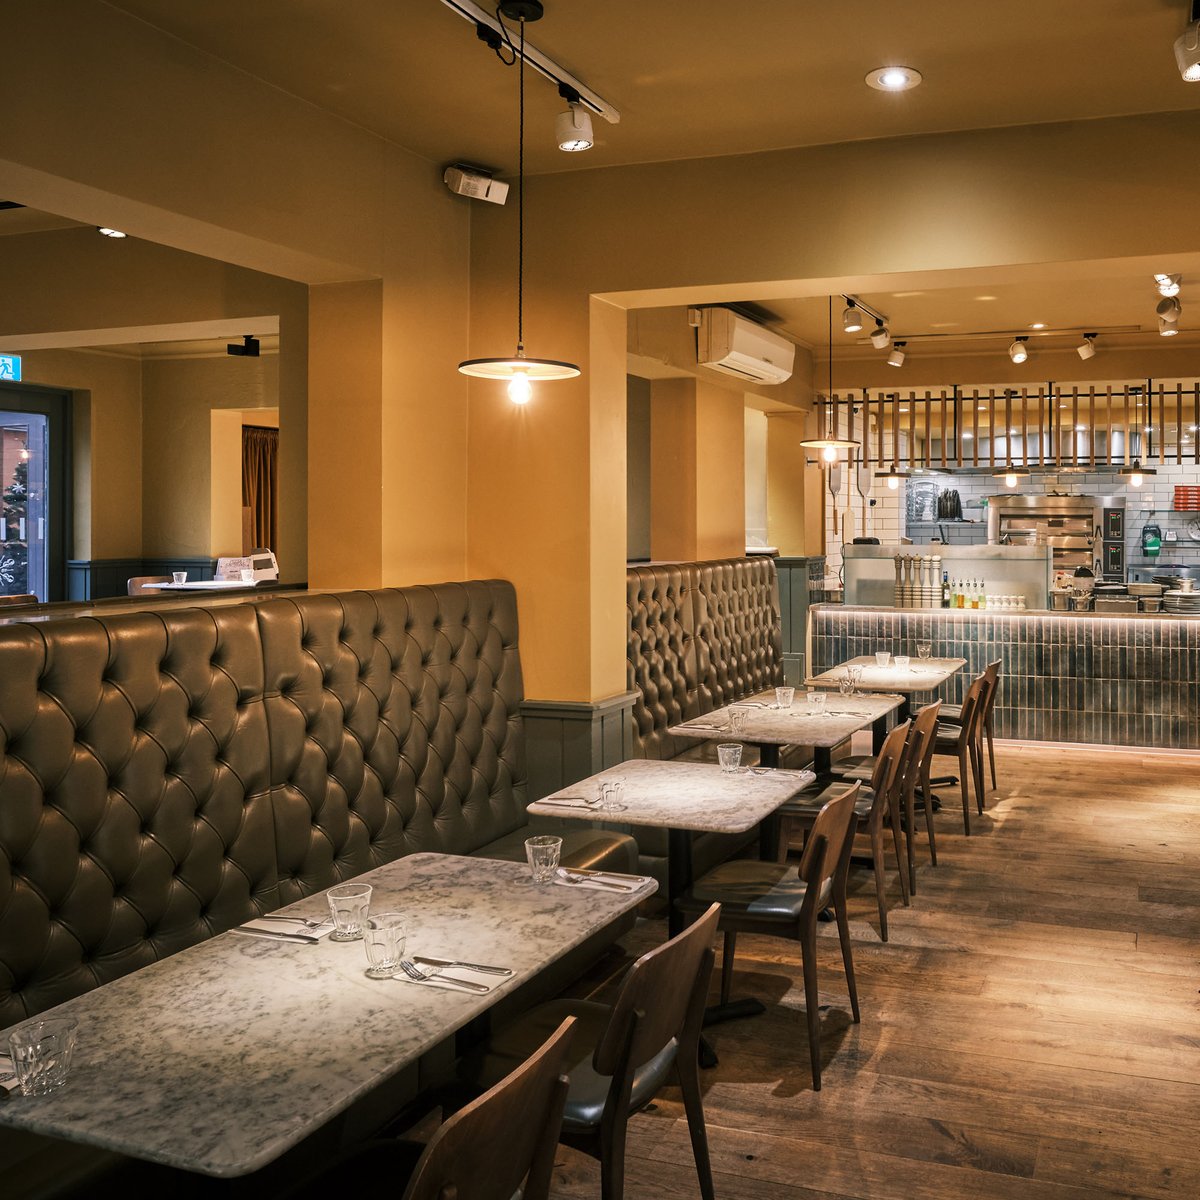 Another interior design project, completed just before Christmas. Proof that colour can make a huge impact on a space. We love this warm yellow. Photo courtesy of PizzaExpress #RestaurantDesign #HospitalityDesign #restaurantinterior #interiordesign #commercialinteriordesign